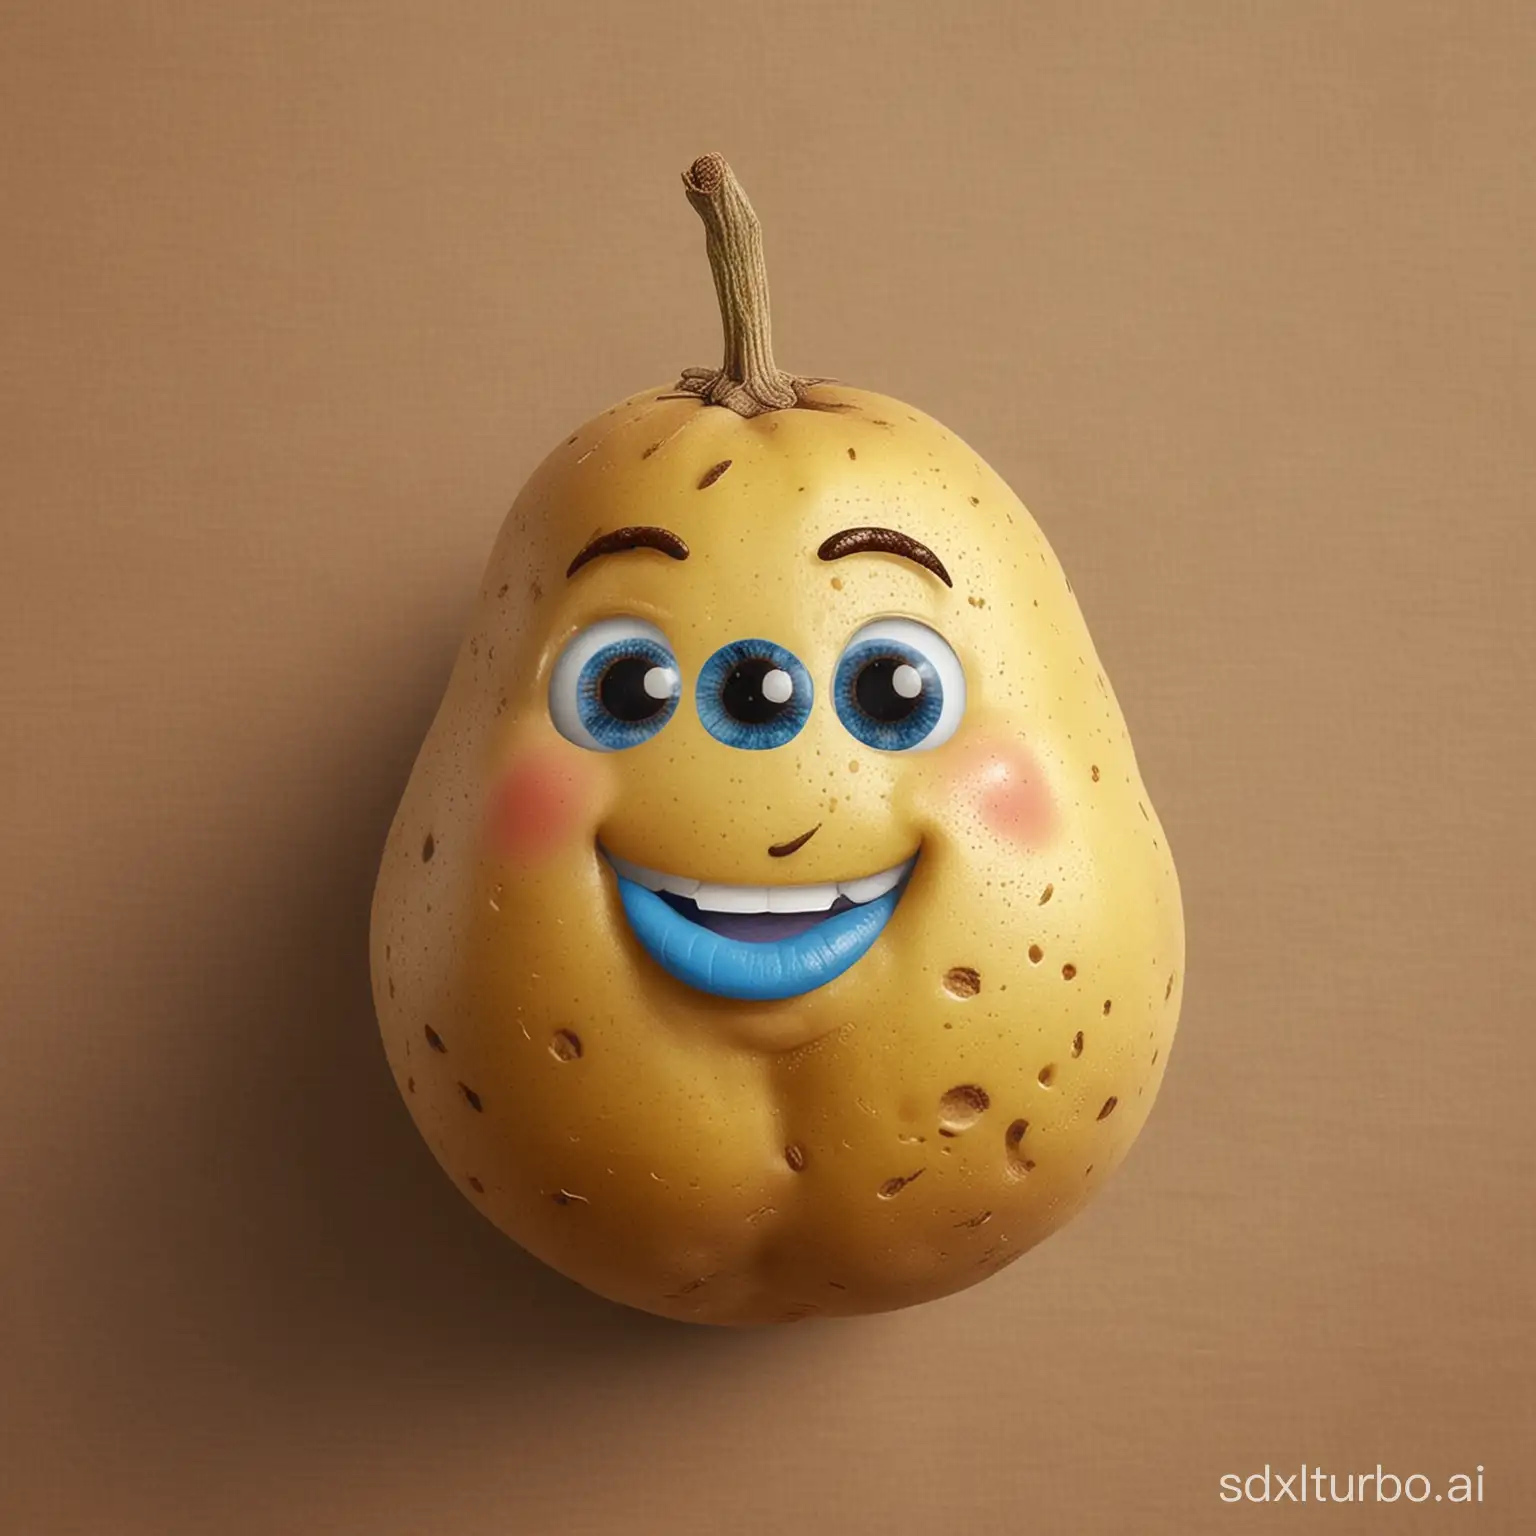 Cheerful-BellWearing-Potato-with-Yellow-Body-and-Blue-Eyes